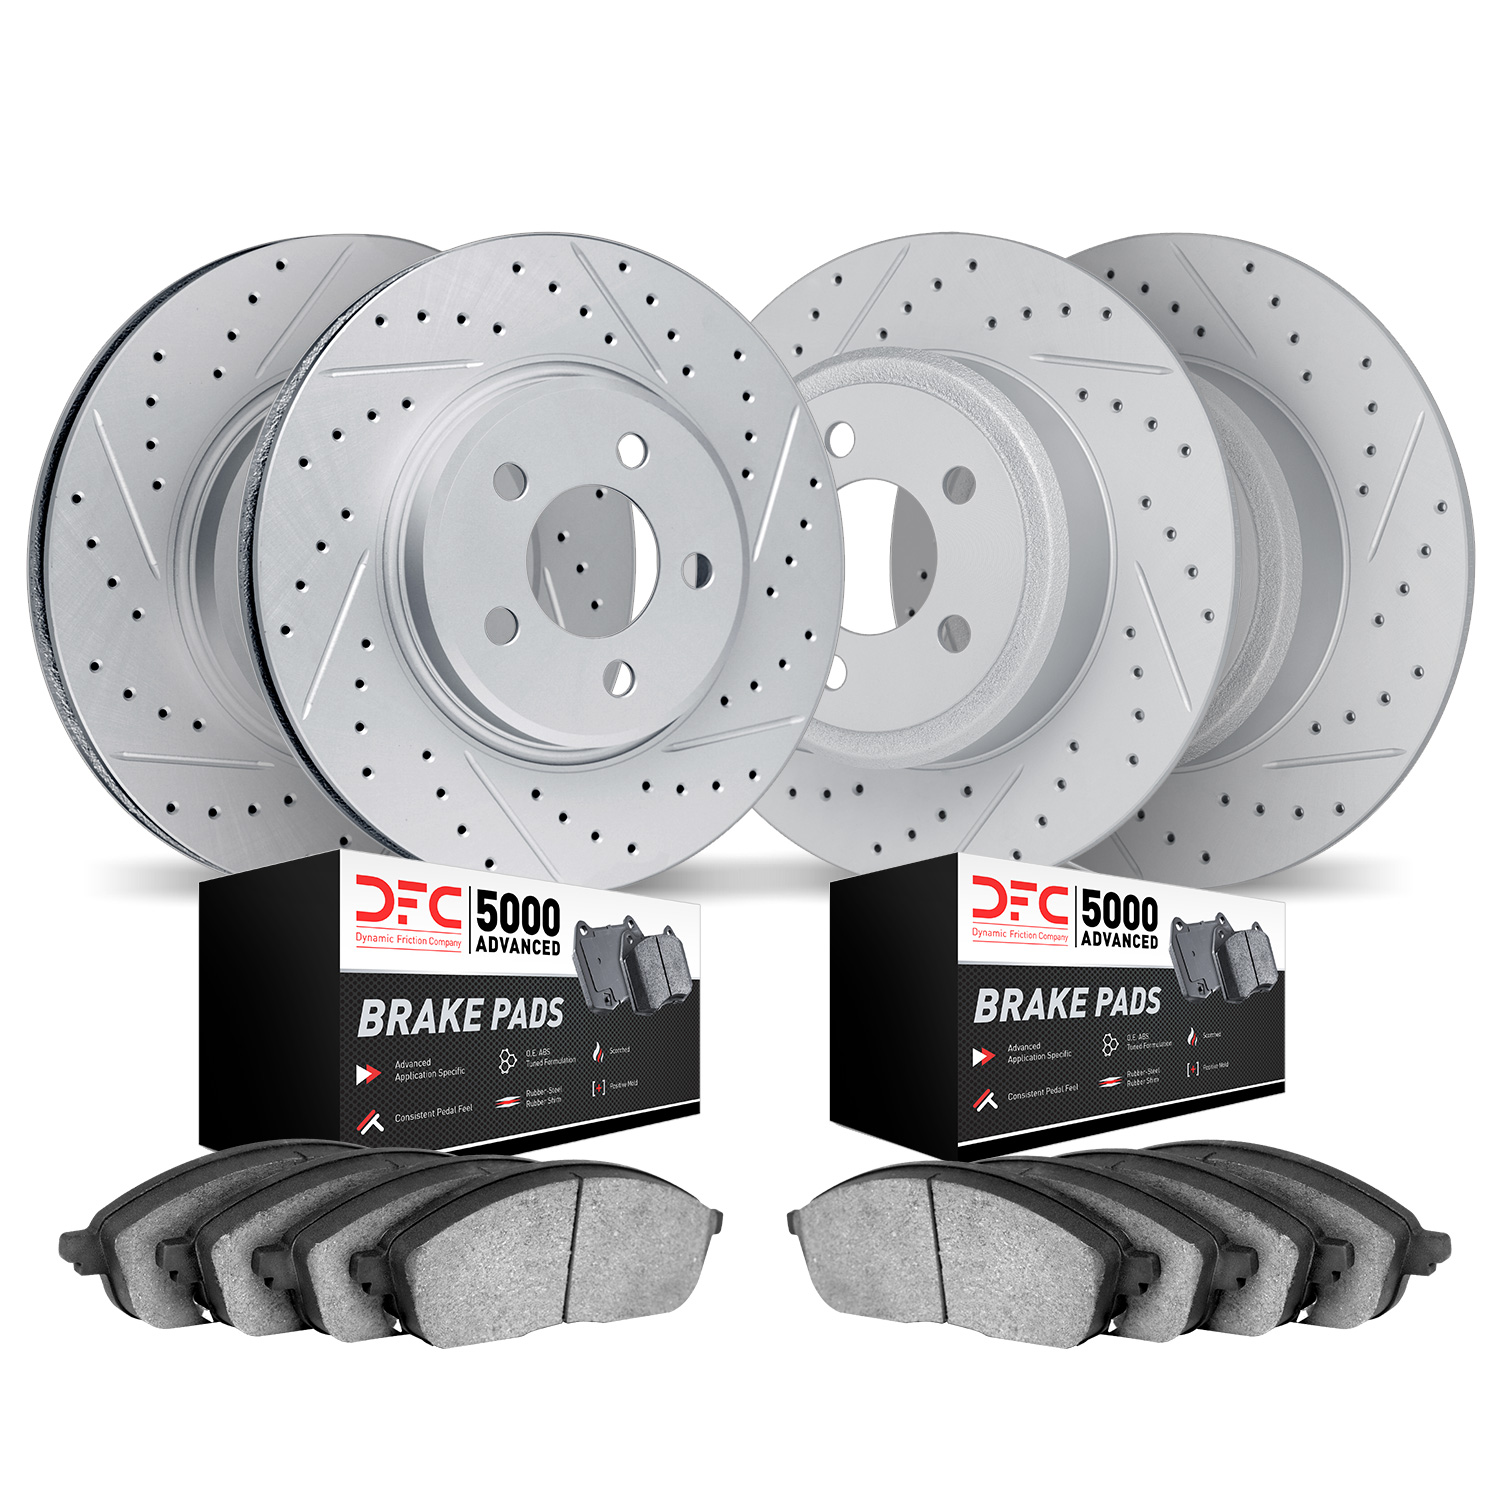 2504-45019 Geoperformance Drilled/Slotted Rotors w/5000 Advanced Brake Pads Kit, 2006-2011 GM, Position: Front and Rear